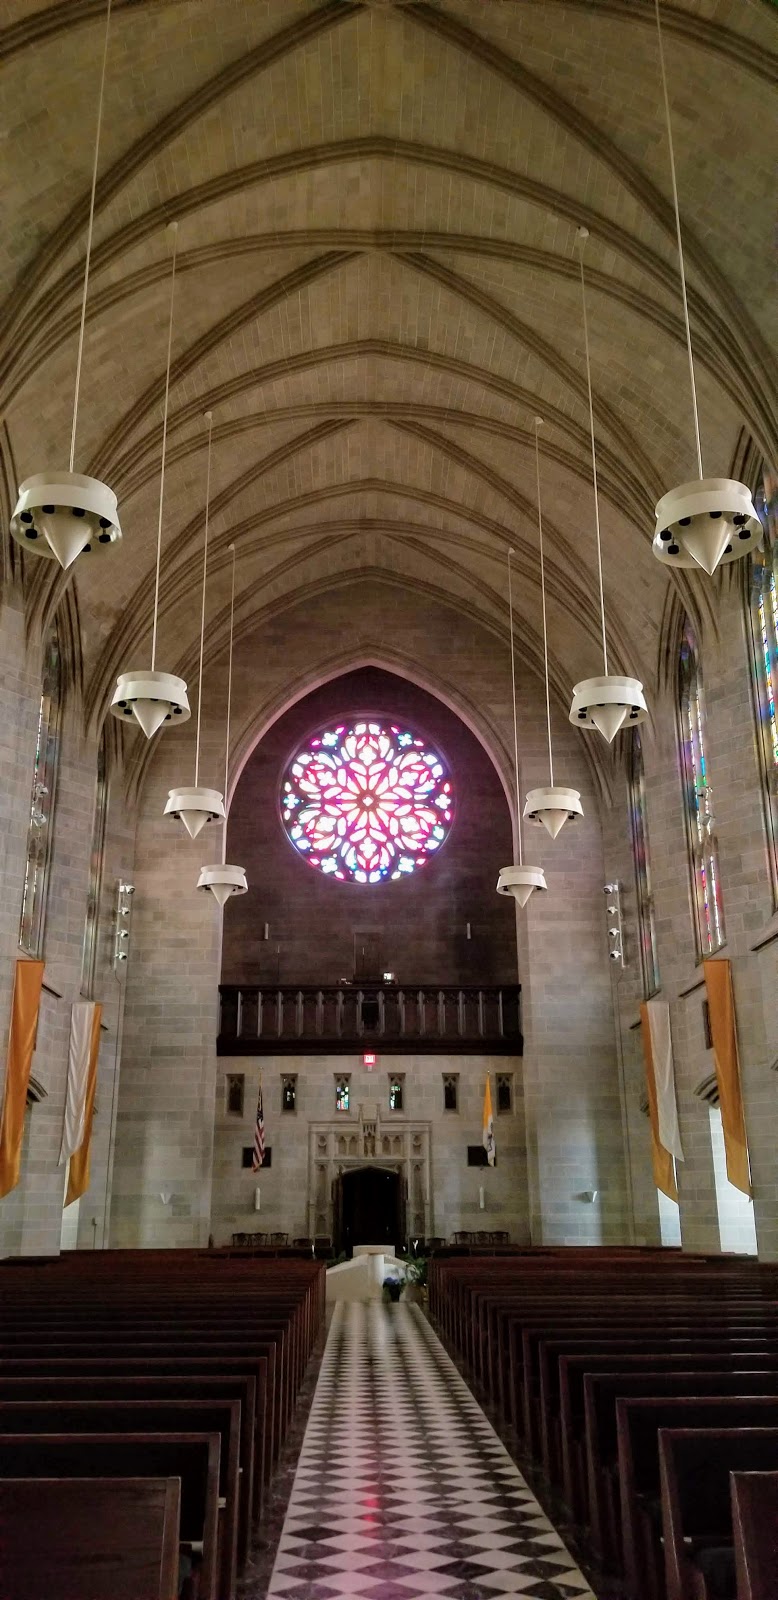 Cathedral of the Most Blessed Sacrament | 9844 Woodward Ave, Detroit, MI 48202, USA | Phone: (313) 865-6300